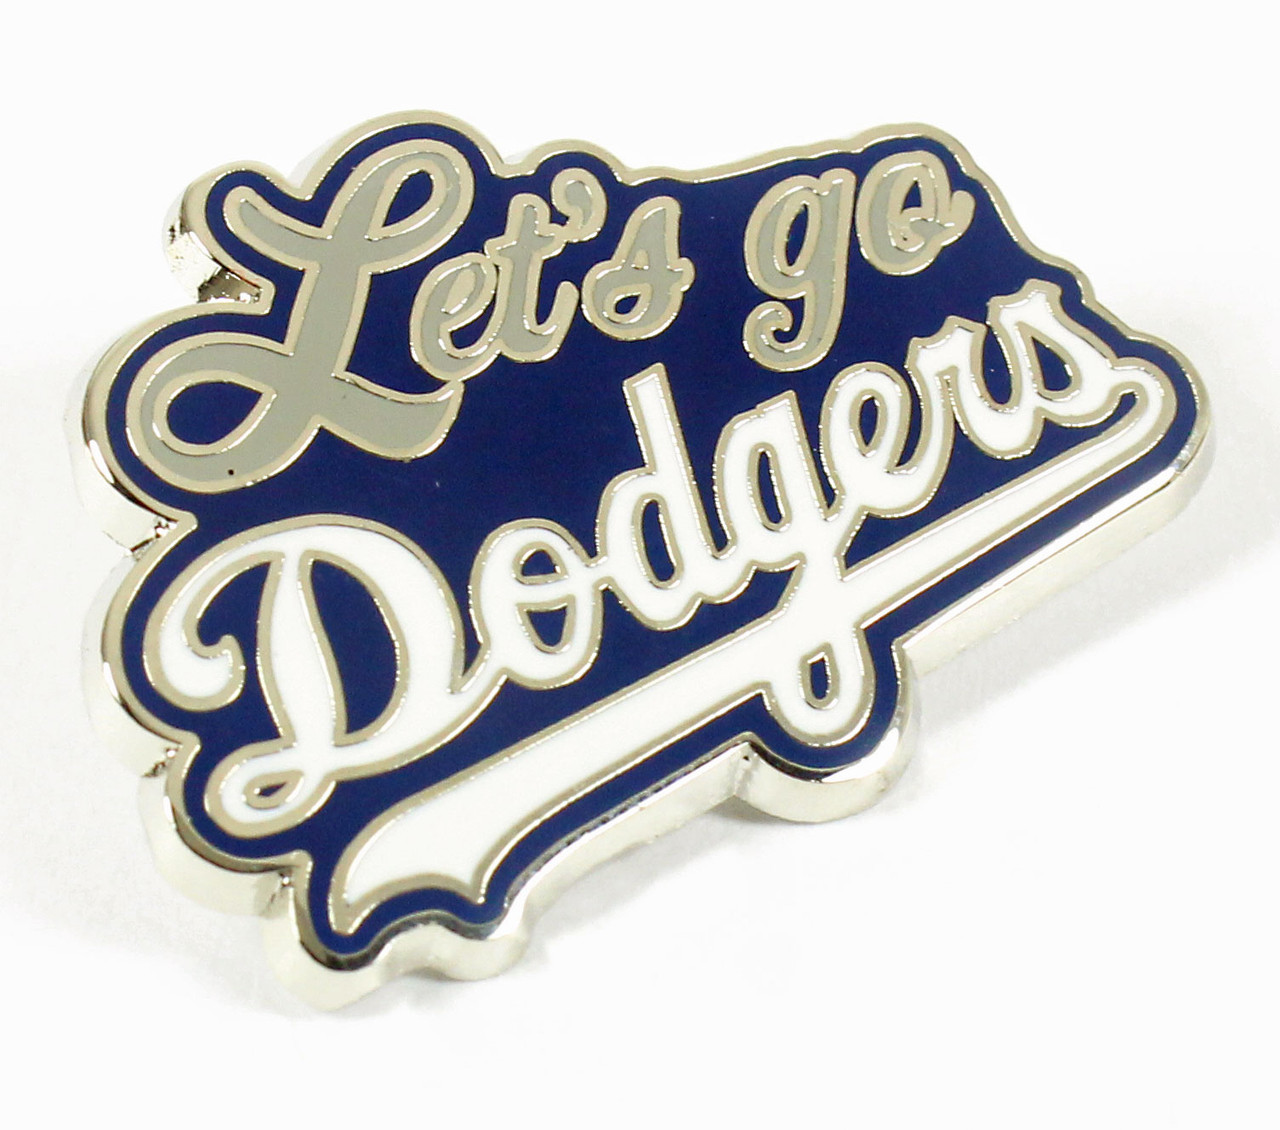 Official Los Angeles Dodgers Collector Pins, Dodgers Collectible Pin Sets